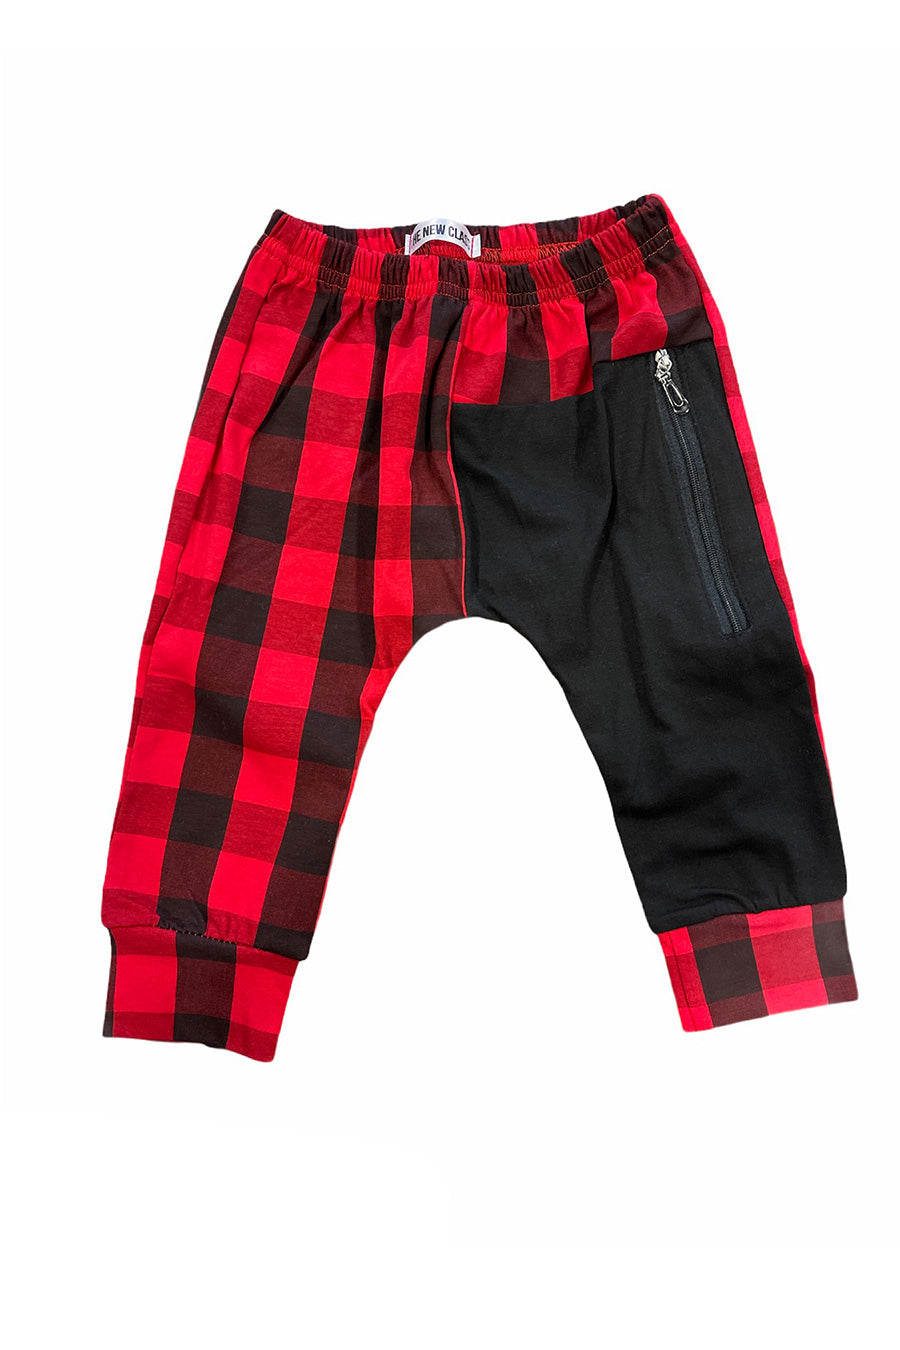 Checkered Kids Jogger | Red/Black - Main Image Number 1 of 2